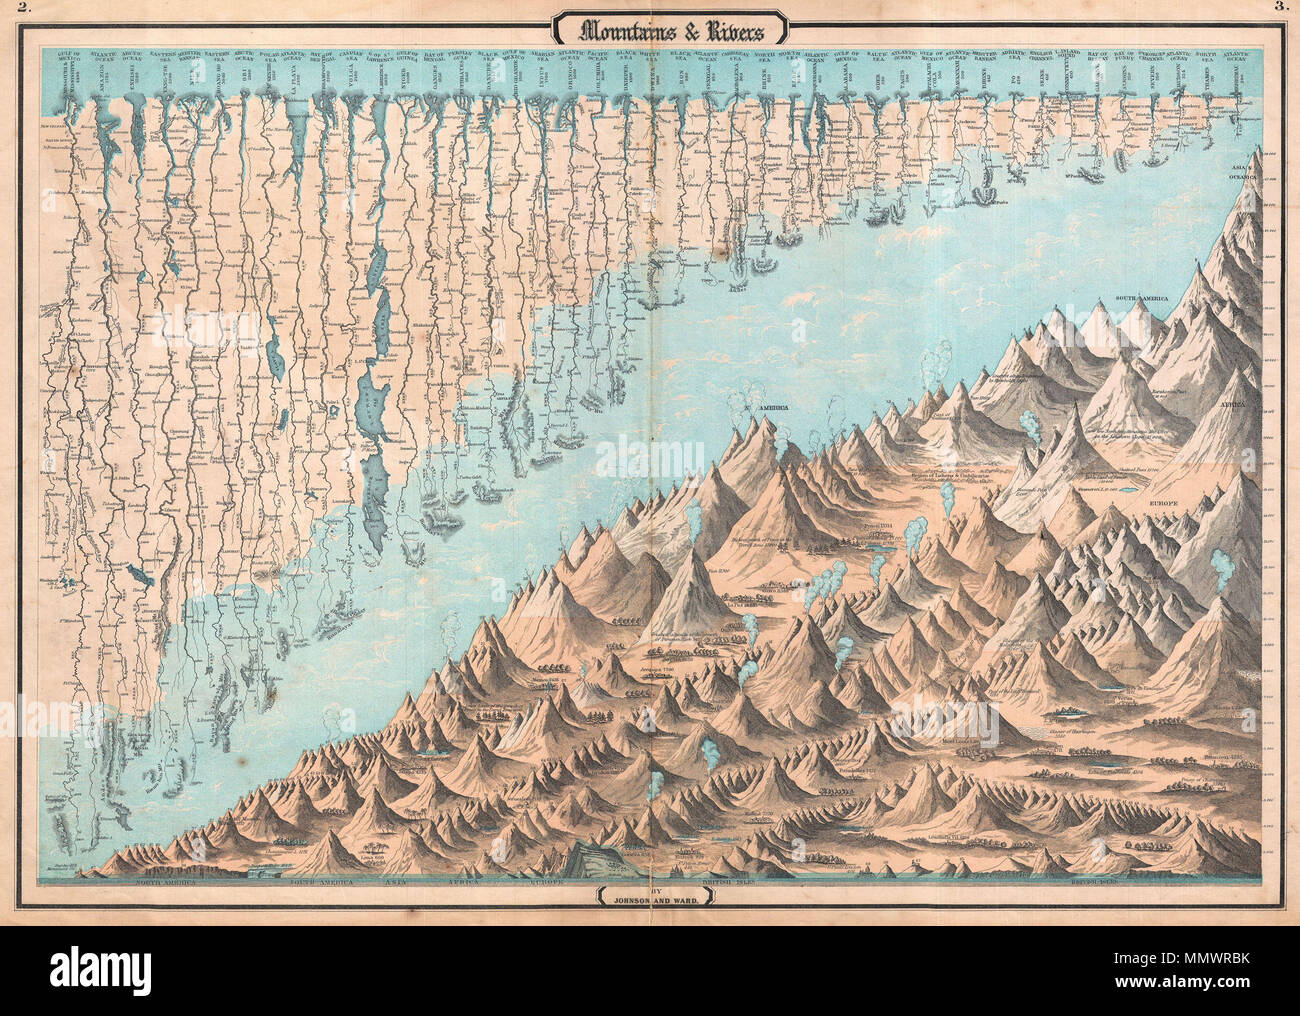 .  English: One of the finest Mountains and River’s Chart published in the mid 19th century. This is the 1862 edition of Johnson and Ward chart or map of the relative distances of the world’s great rivers and the relative heights of the world’s great mountains. Includes a multitude of details regarding the heights of important cities, glaciers, volcanoes, and tree lines. Chart even includes Niagara Falls, the Great Pyramid, St. Peter’s Basilica in Rome and St. Paul’s in London. It is extremely rare to find this map such fine condition as this one because it was issued at the front of Johnson’s Stock Photo